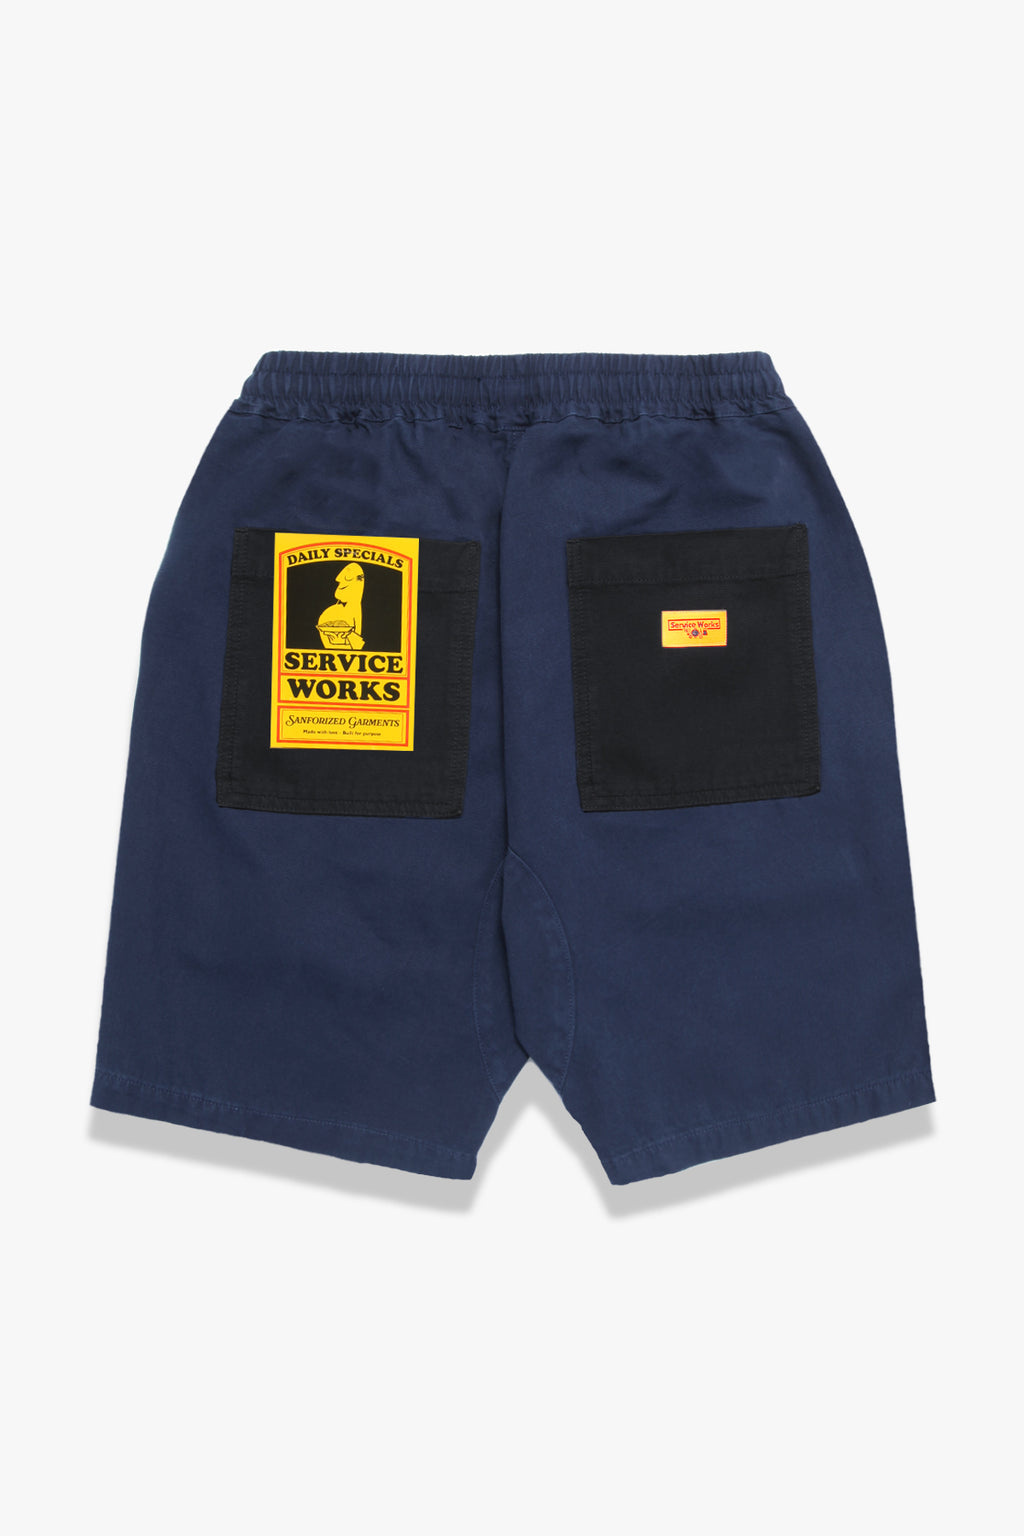 Service Works - Classic Chef Shorts - Midnight